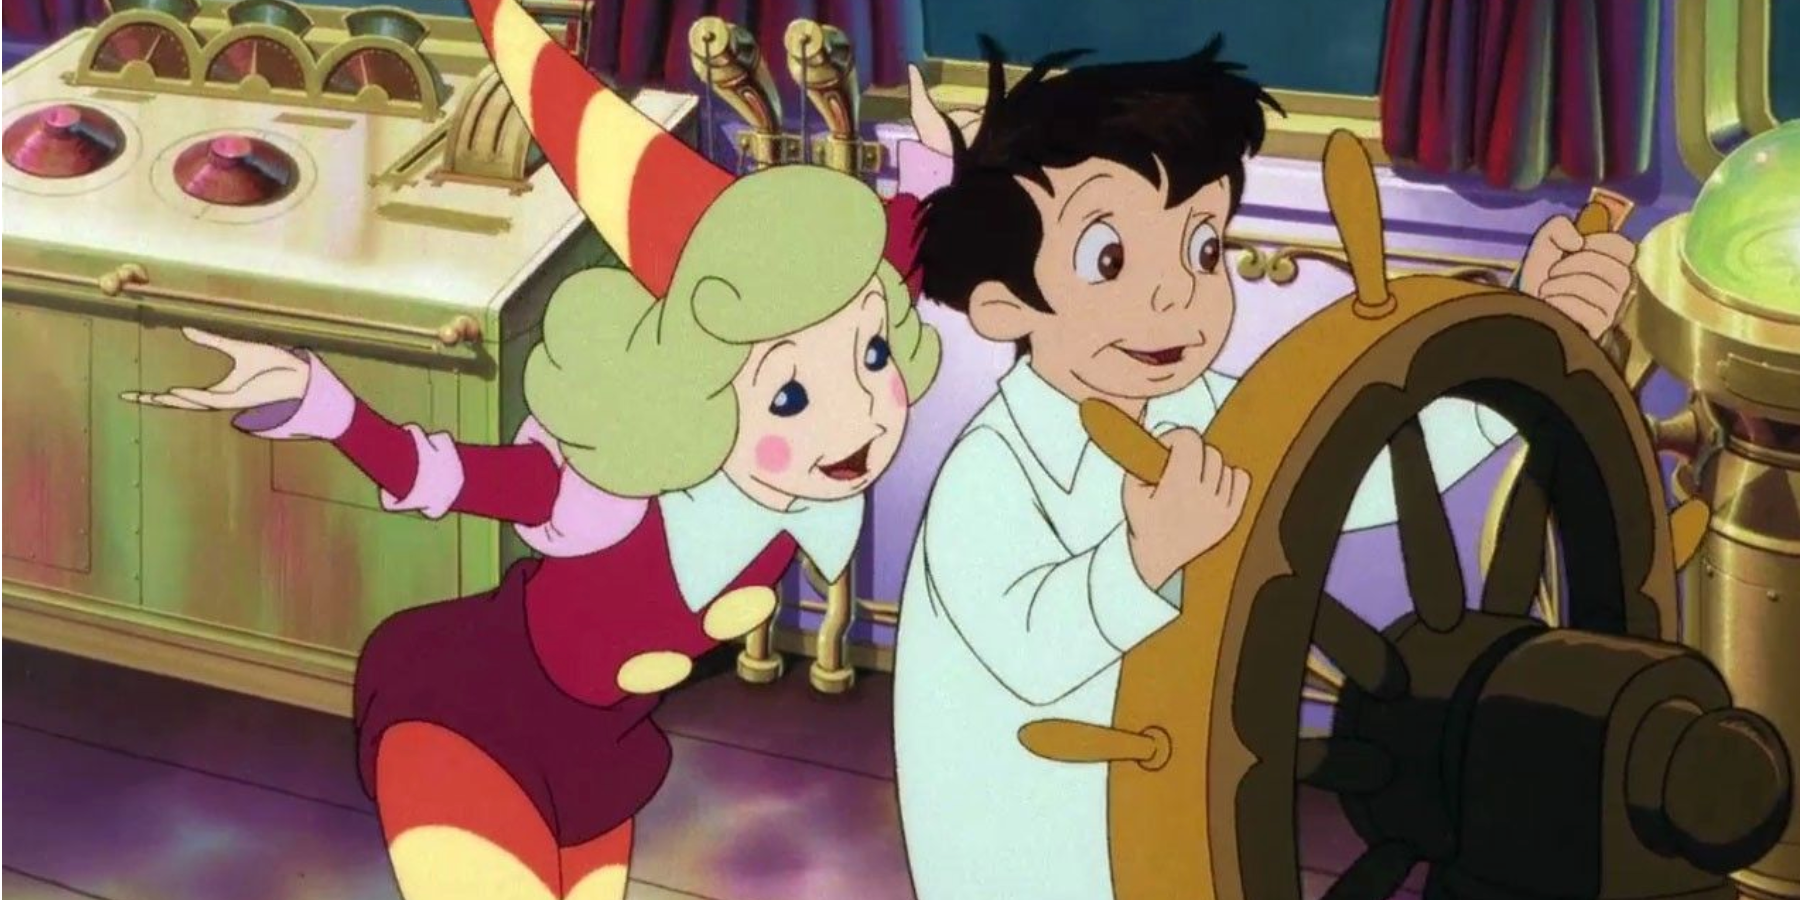 Two characters steer a ship and talk in Little Nemo.